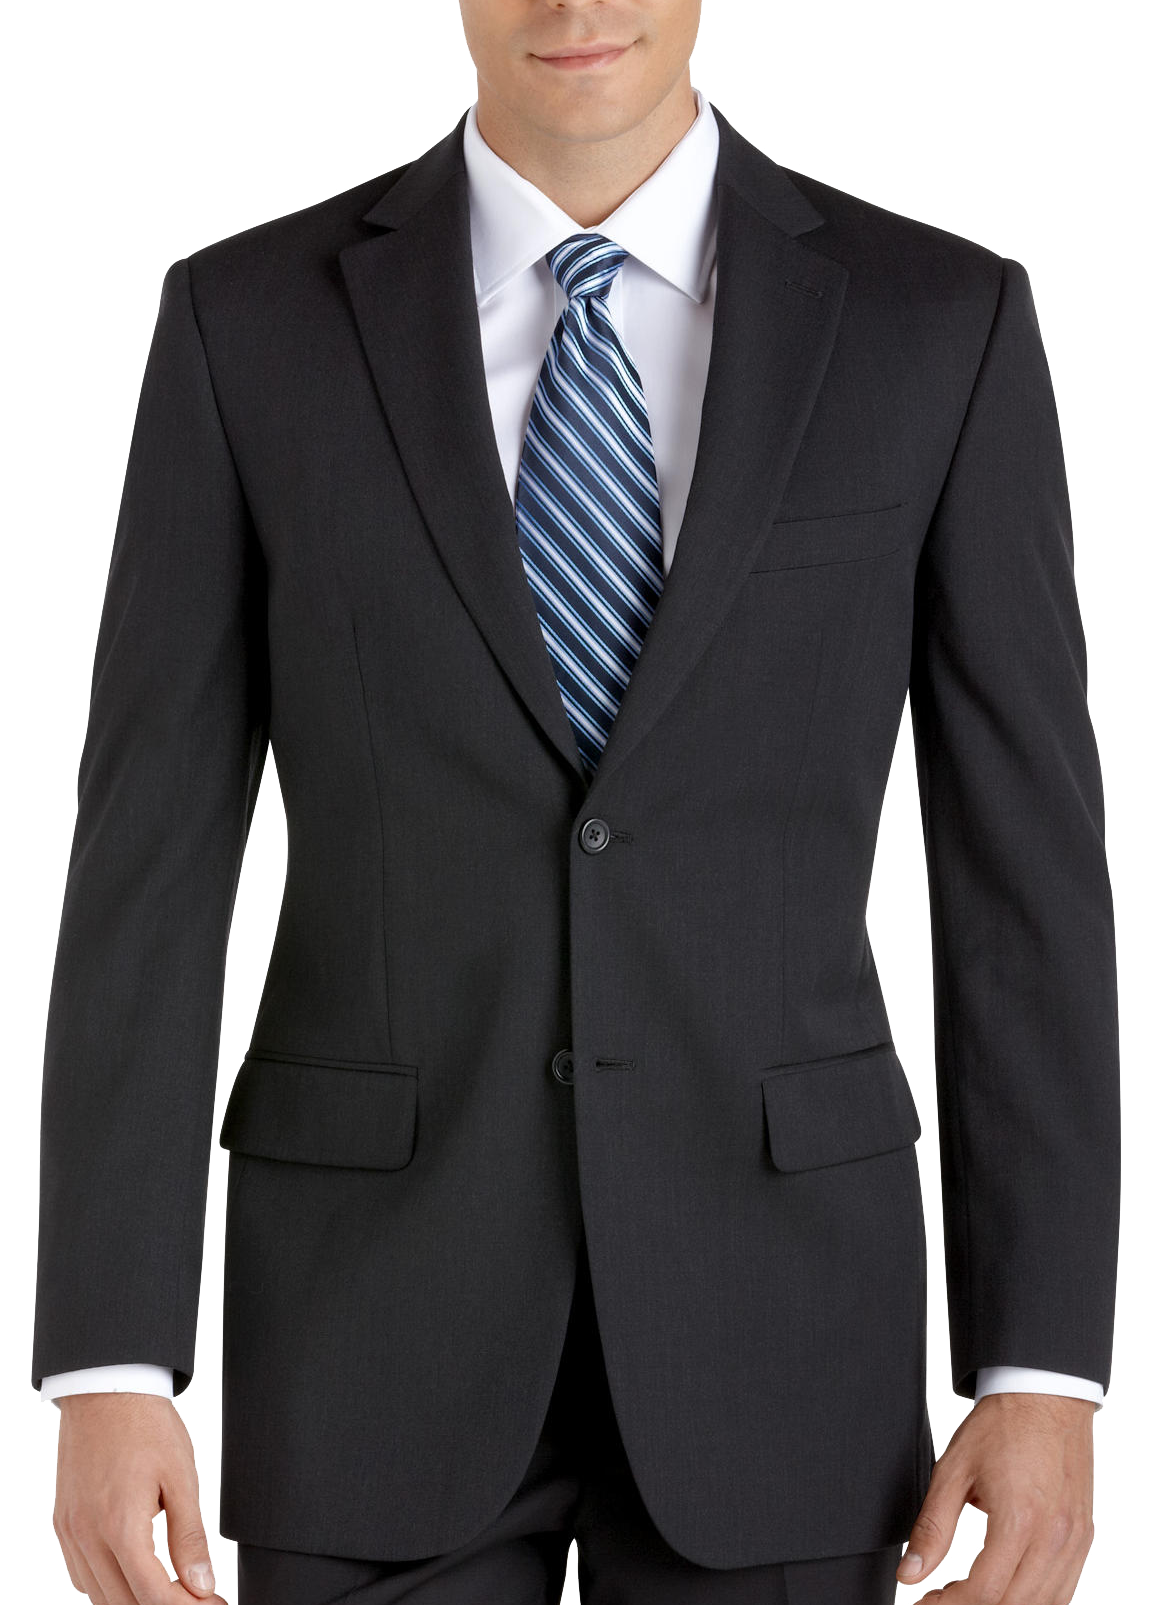 Portly Suits For Men | Men'S Wearhouse